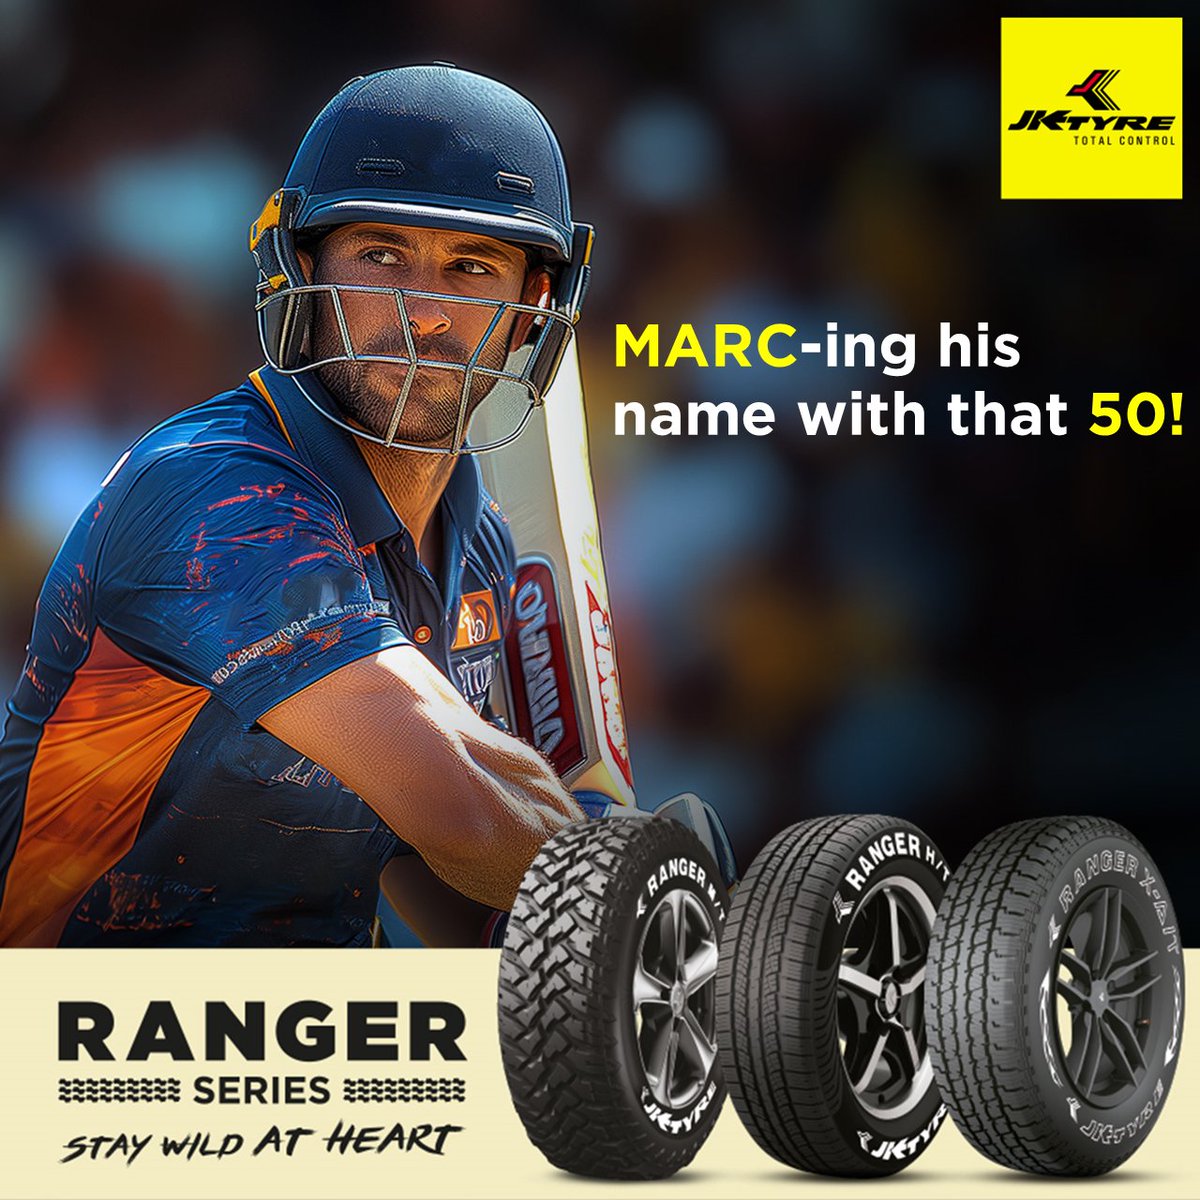 A 50 that's as wild as our Ranger series tyre! Check out the #RangerSeries from JK Tyre, built for adventures, and multiple terrains, for those who are ‘Wild at Heart’. #JKTyre #IndianT20League #Mumbai #Lucknow